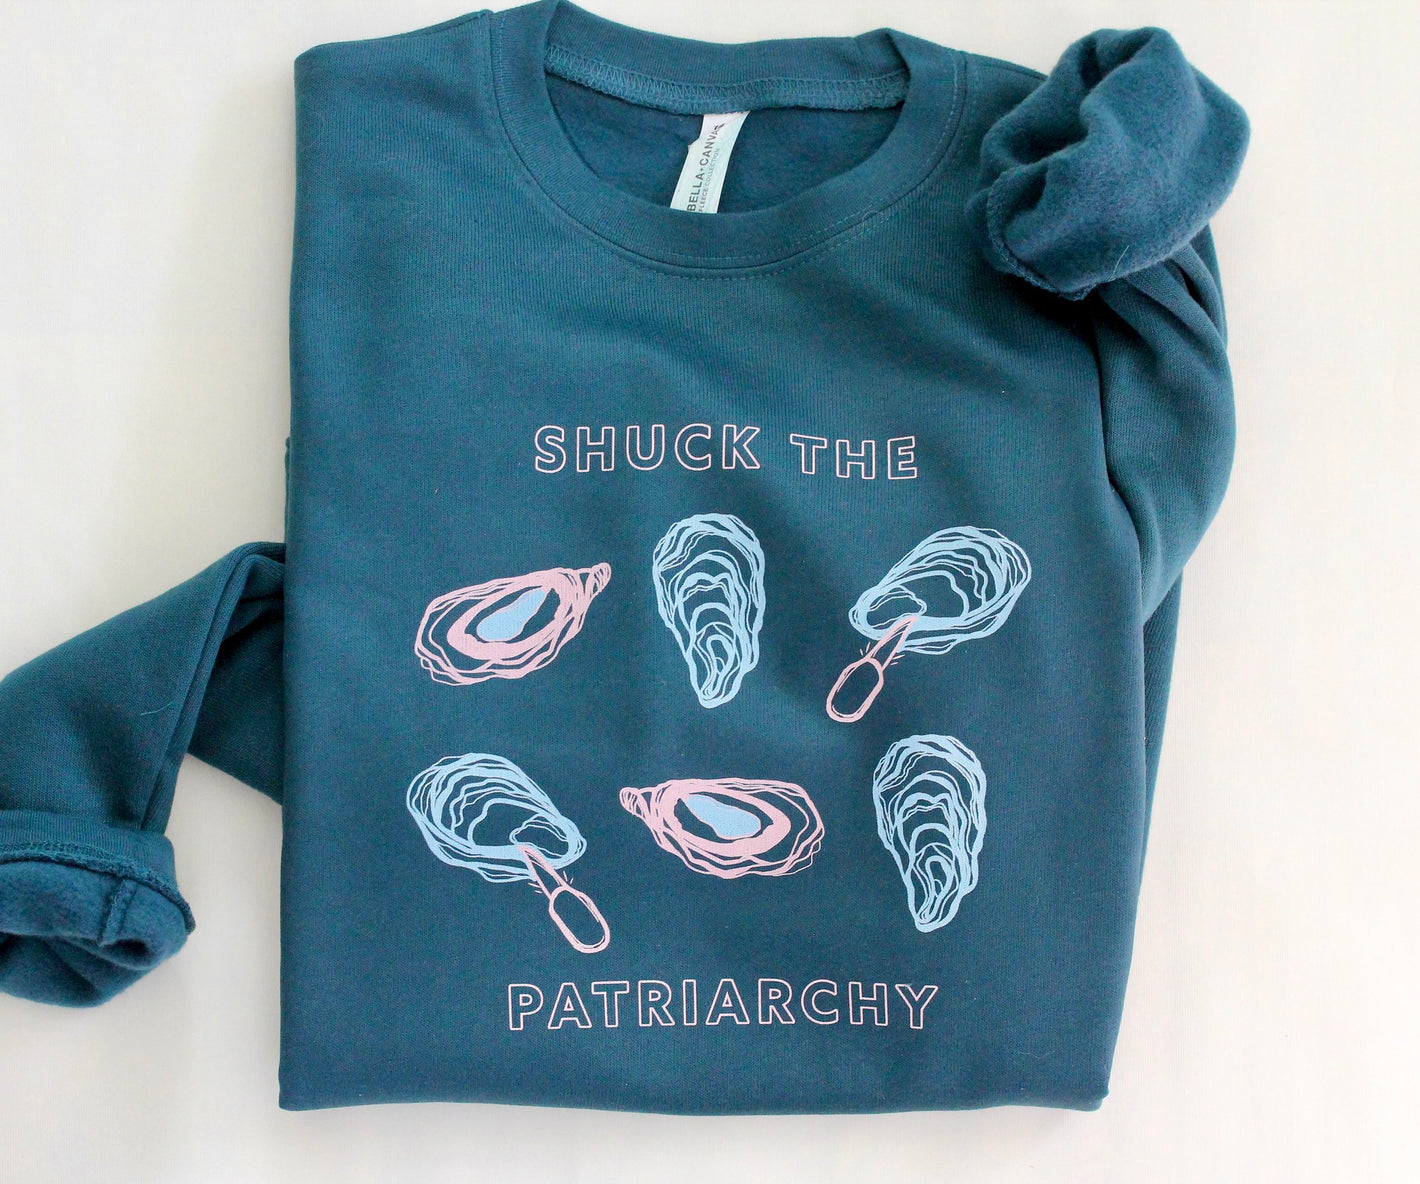 A folded dark teal crewneck sweatshirt reads "Shuck the Patriarchy" with oyster designs